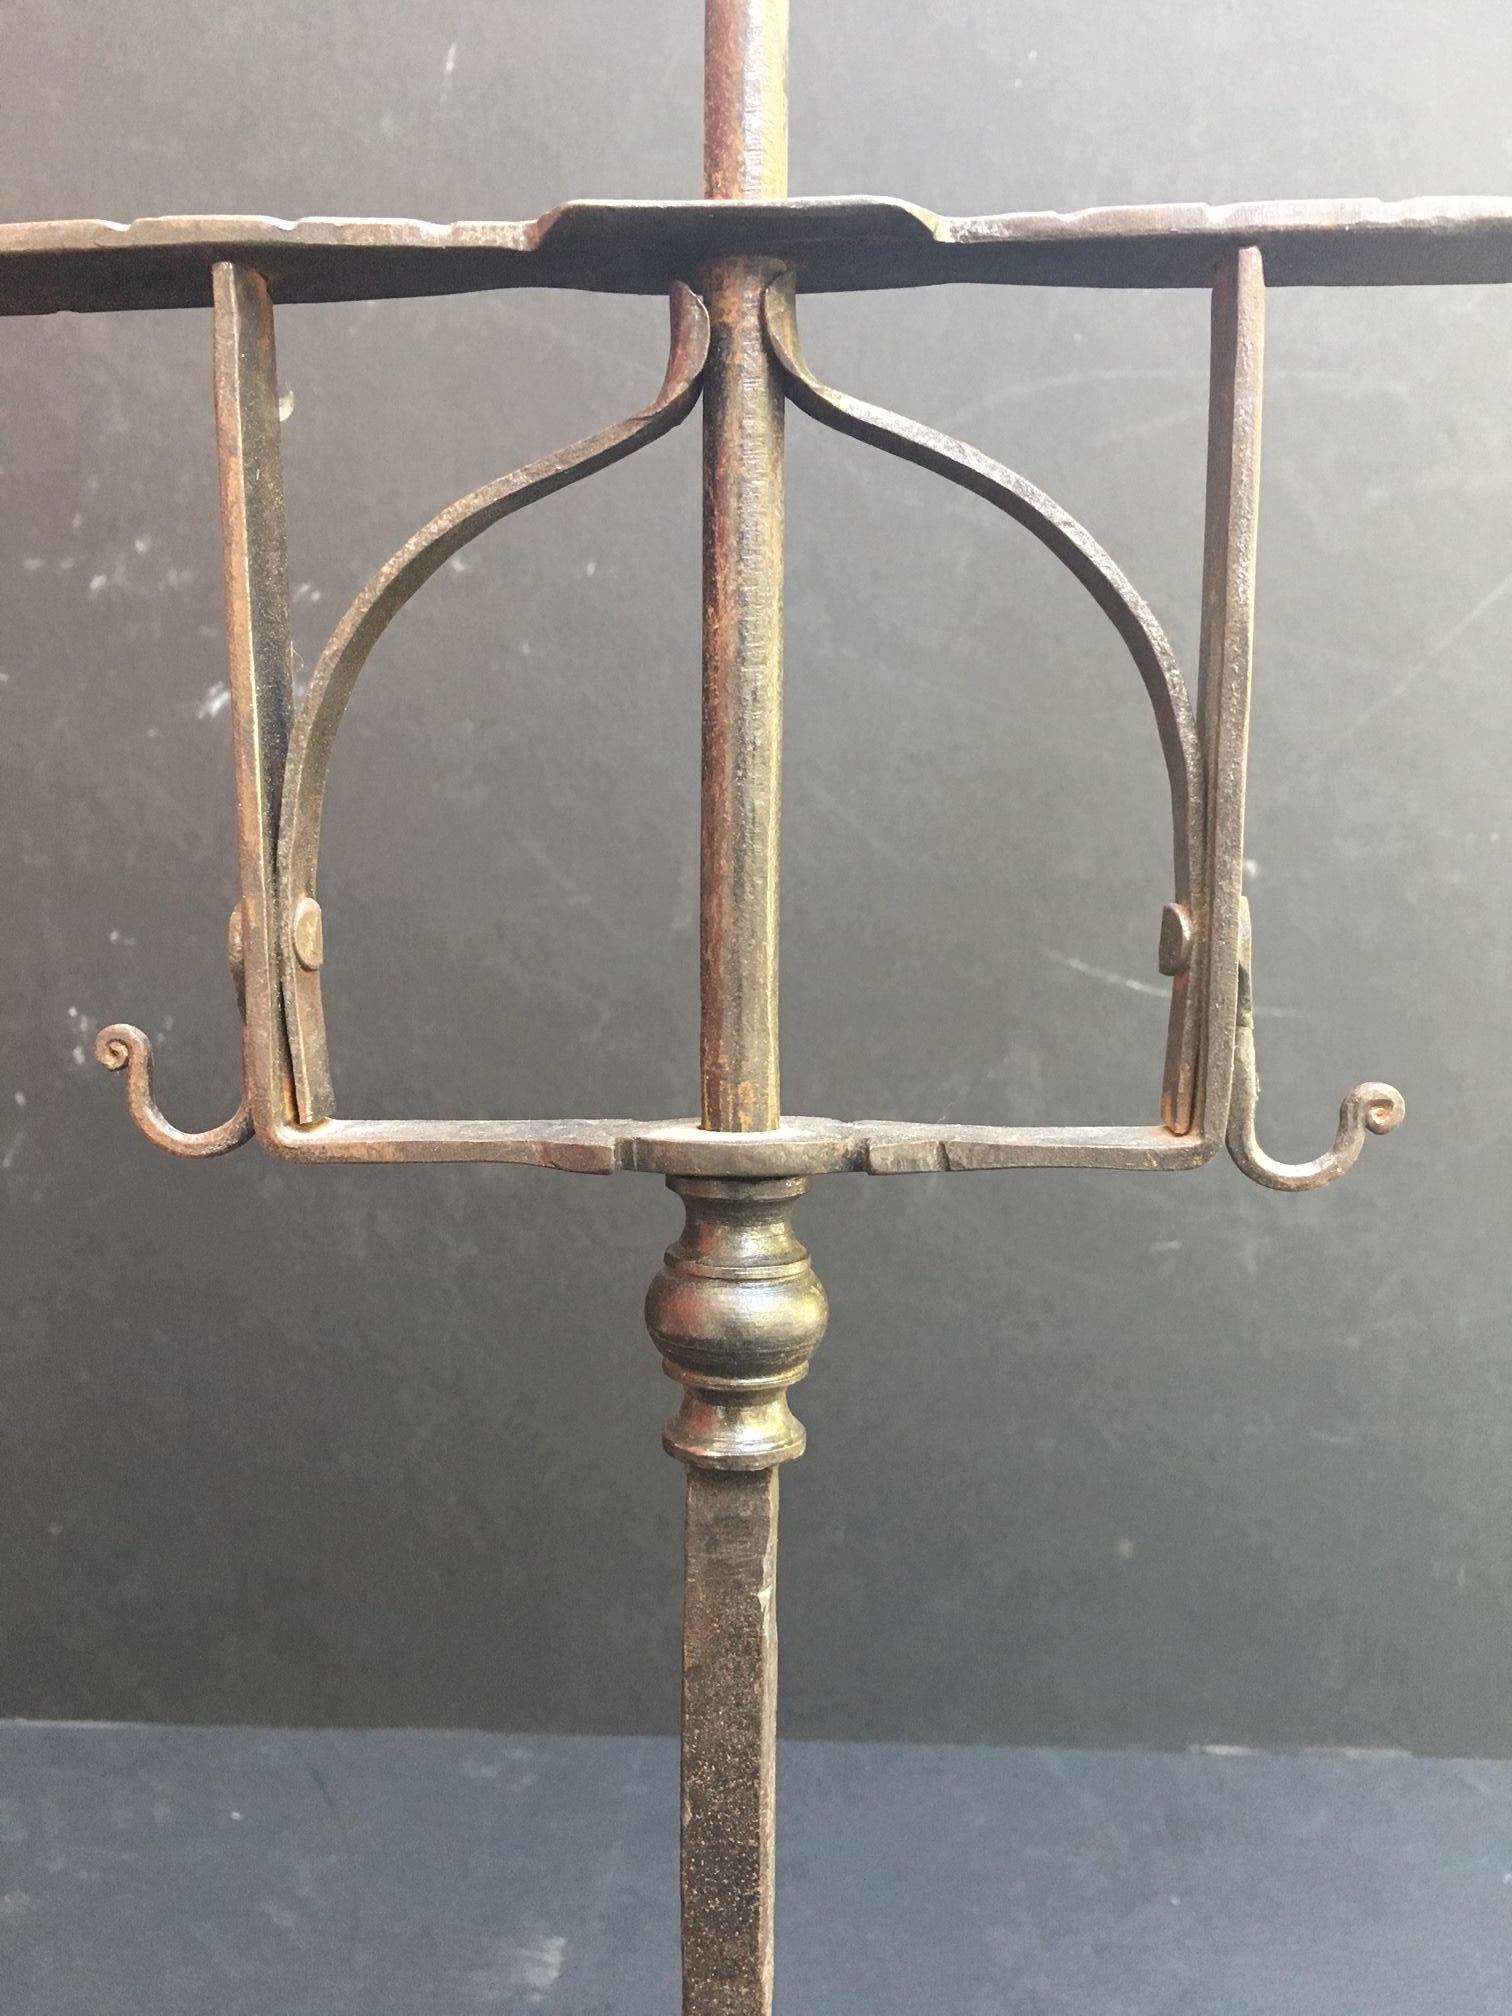 This very beautiful wrought iron candelabra stands on three penny feet. It has a tapered spike with an adjustable two candleholder bridge. This masterfully hand forged iron with stunning details is rustic but elegant. It is an authentic 
piece of